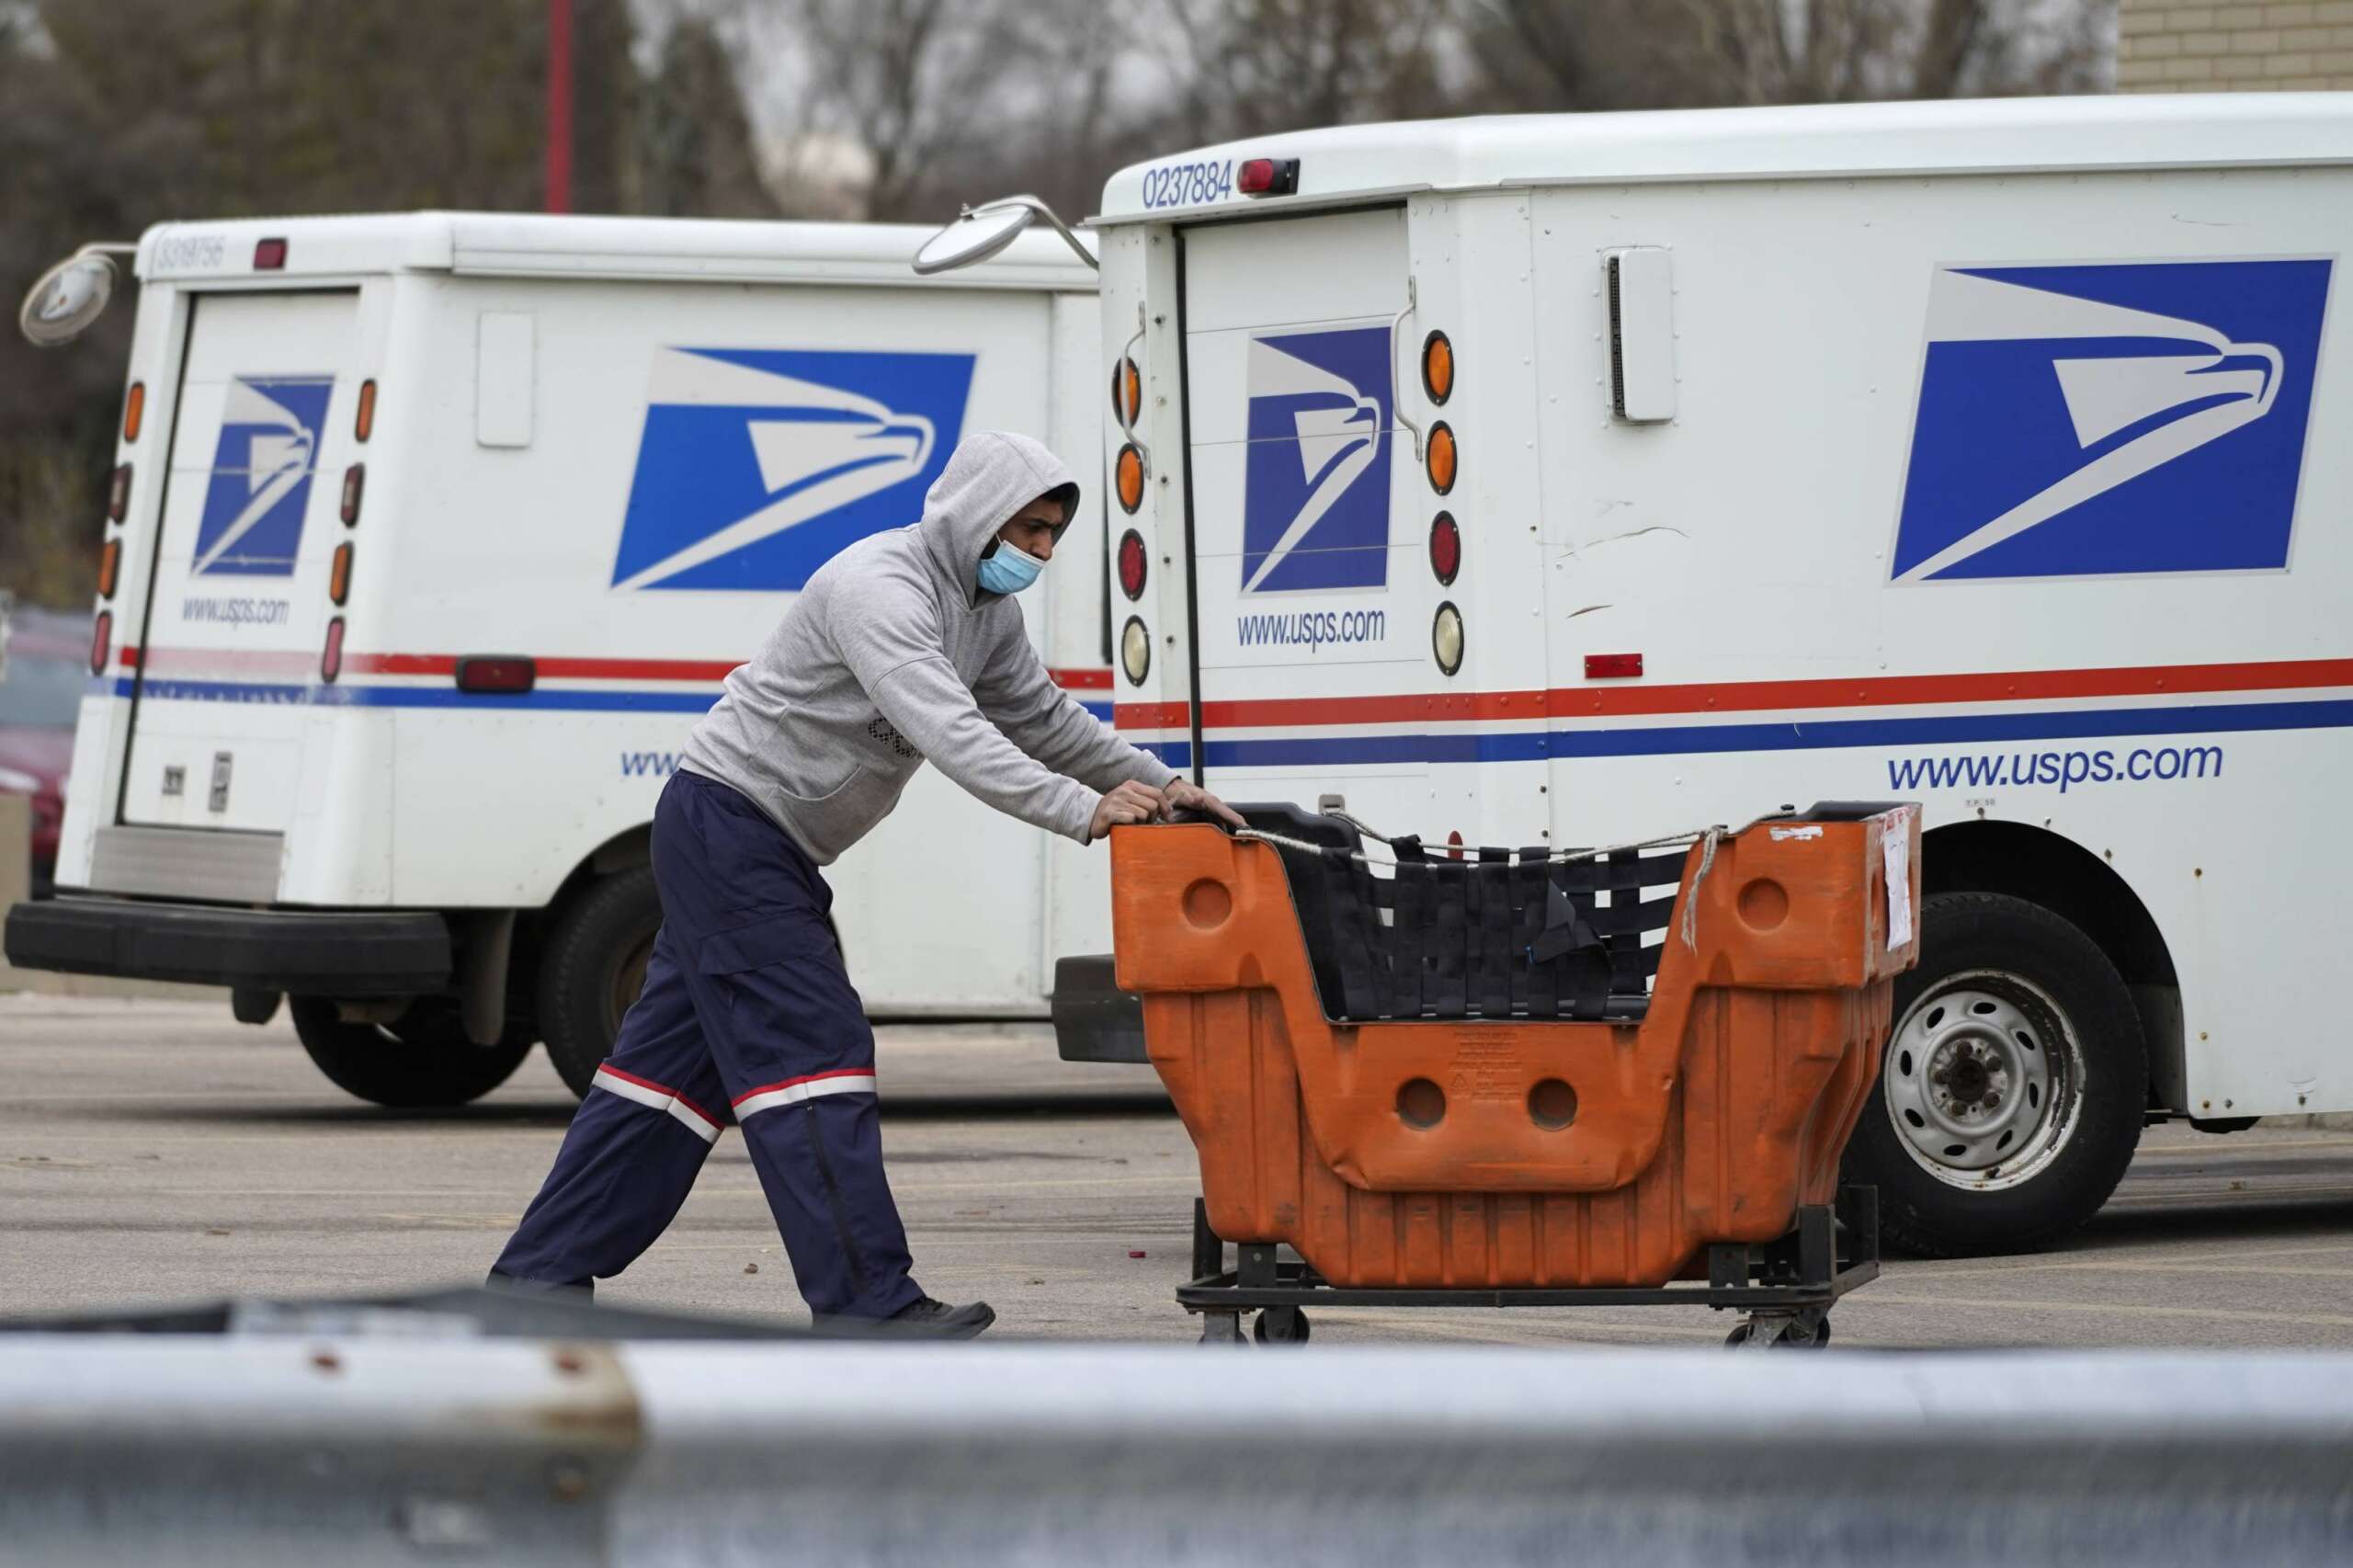 USPS looks to raise rates for fifth time under DeJoy - Government Executive